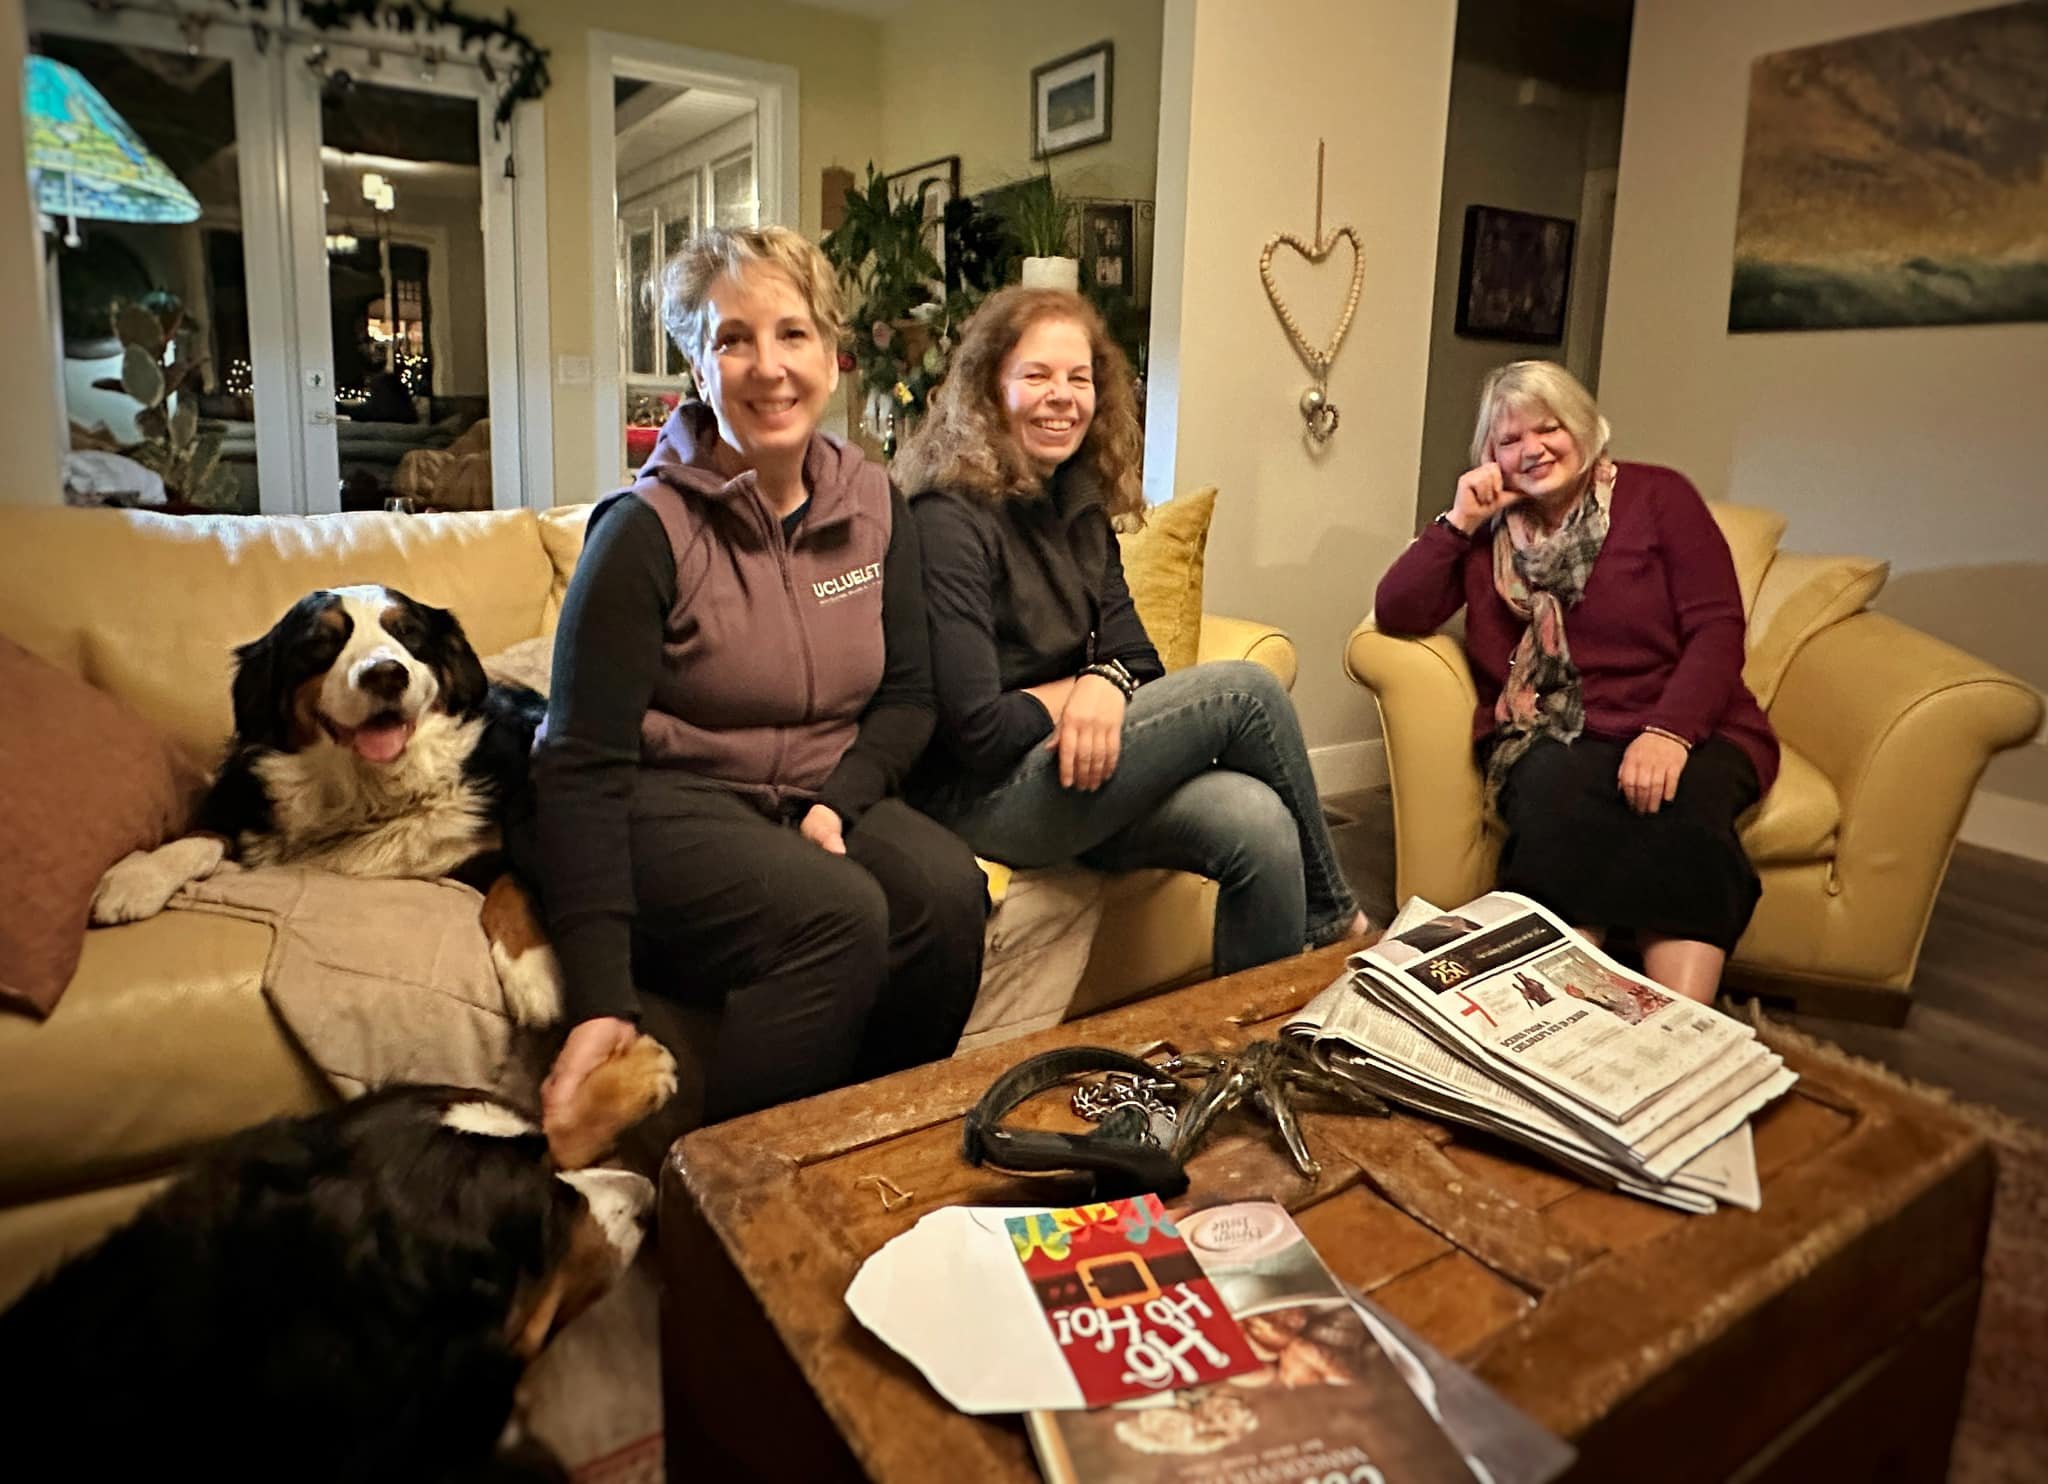  Great people and pups right here: Deirdre, Kate, Nancie, Jackson, Hudson. 